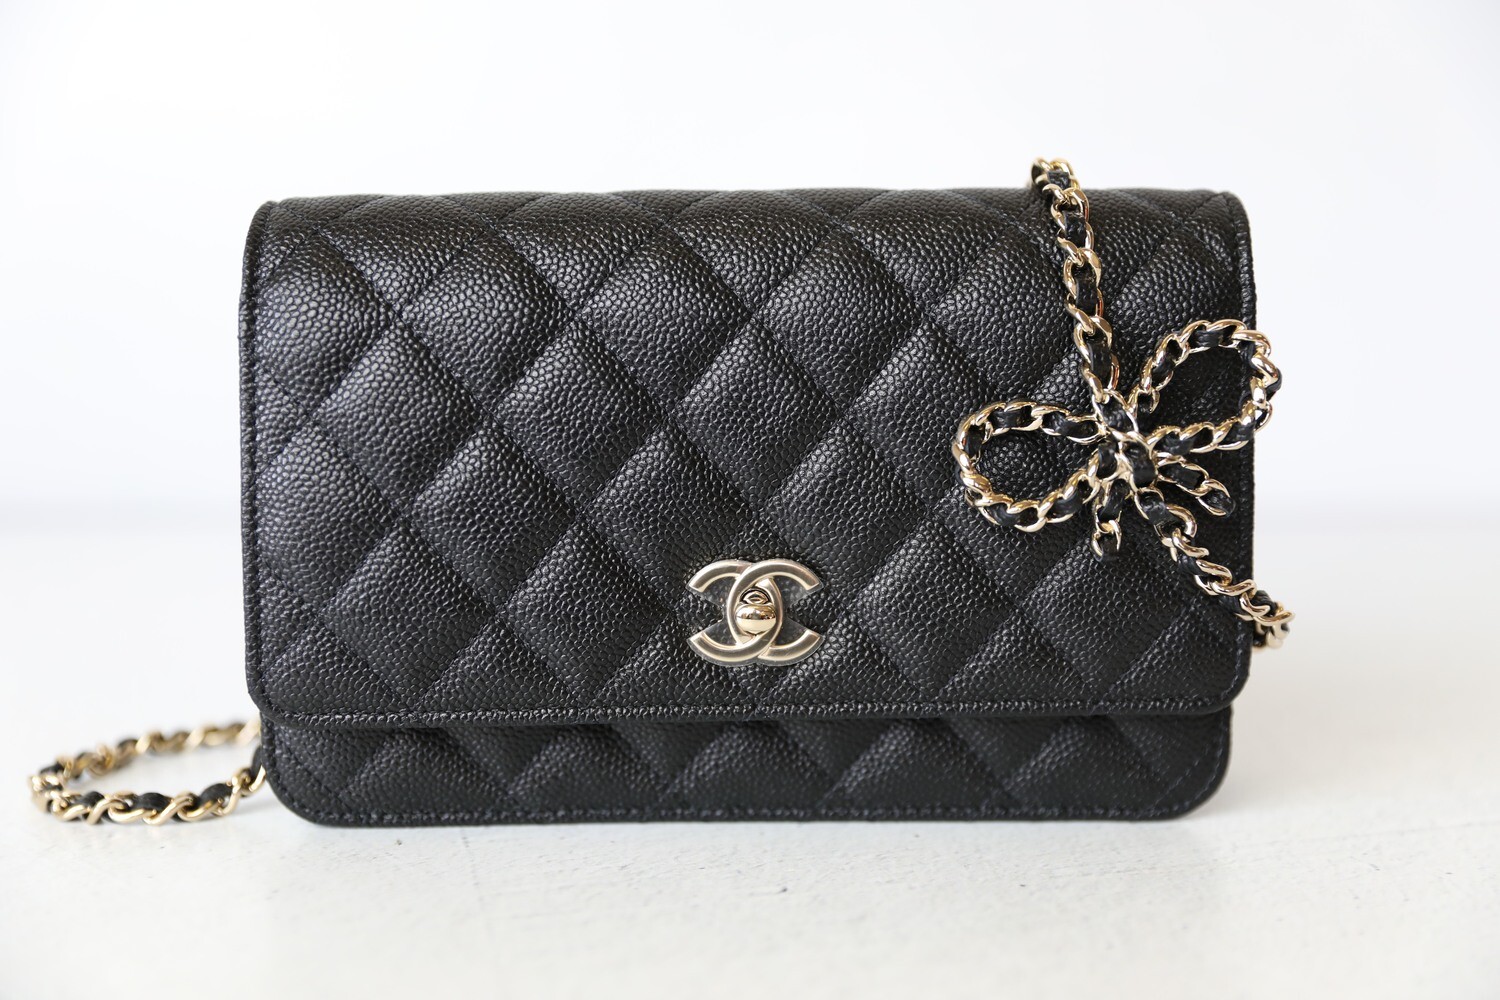 Chanel Turnlock Bow Wallet on Chain, Black Caviar with Gold Hardware, New  in Box WA001